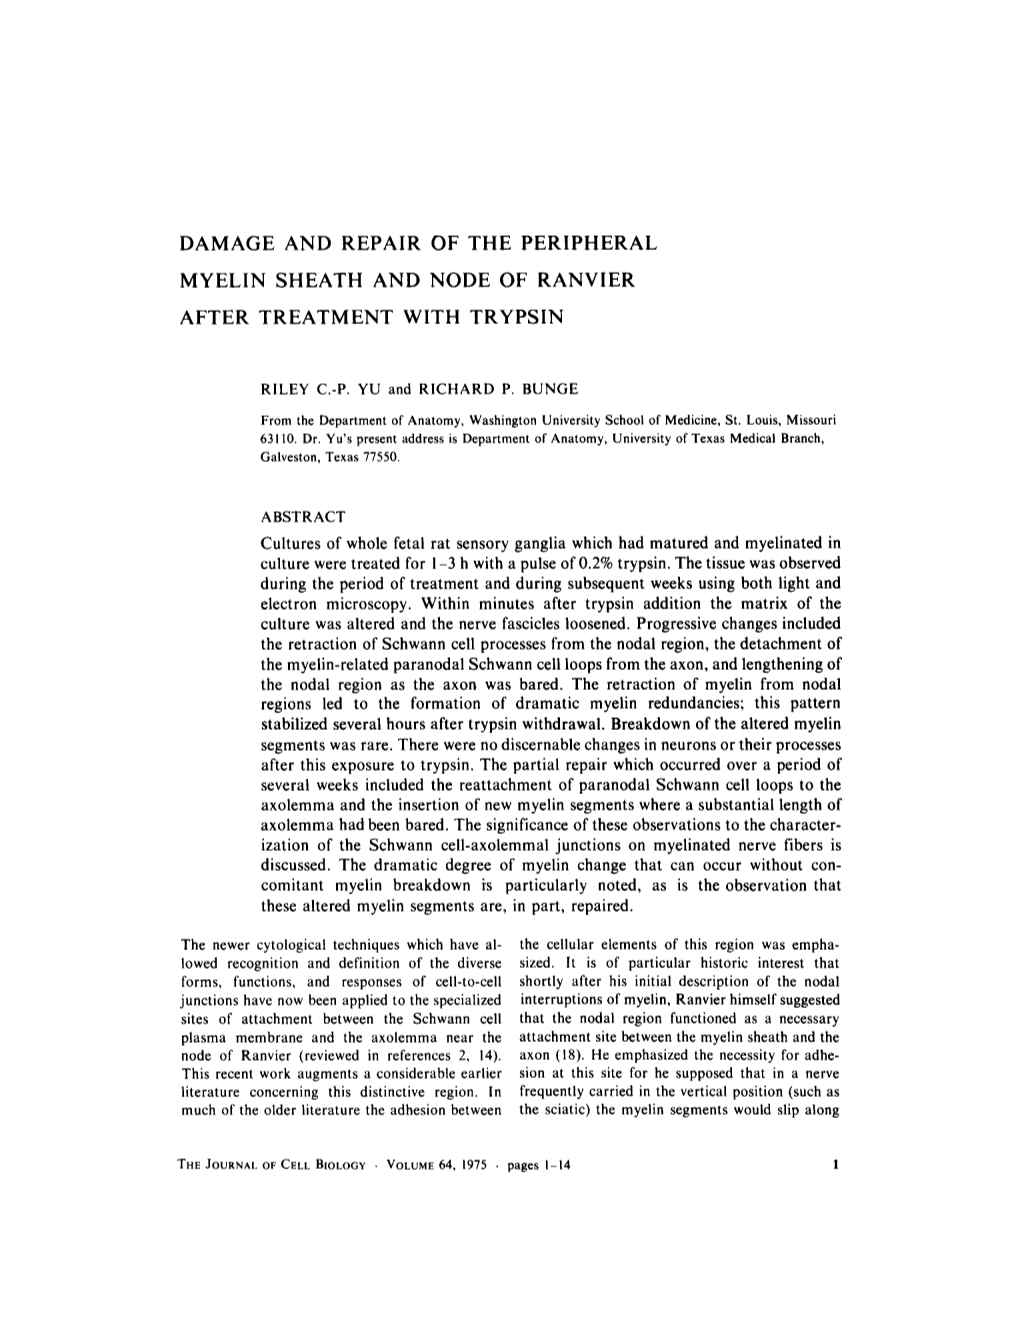 Damage and Repair of the Peripheral Myelin Sheath and Node of Ranvier After Treatment with Trypsin